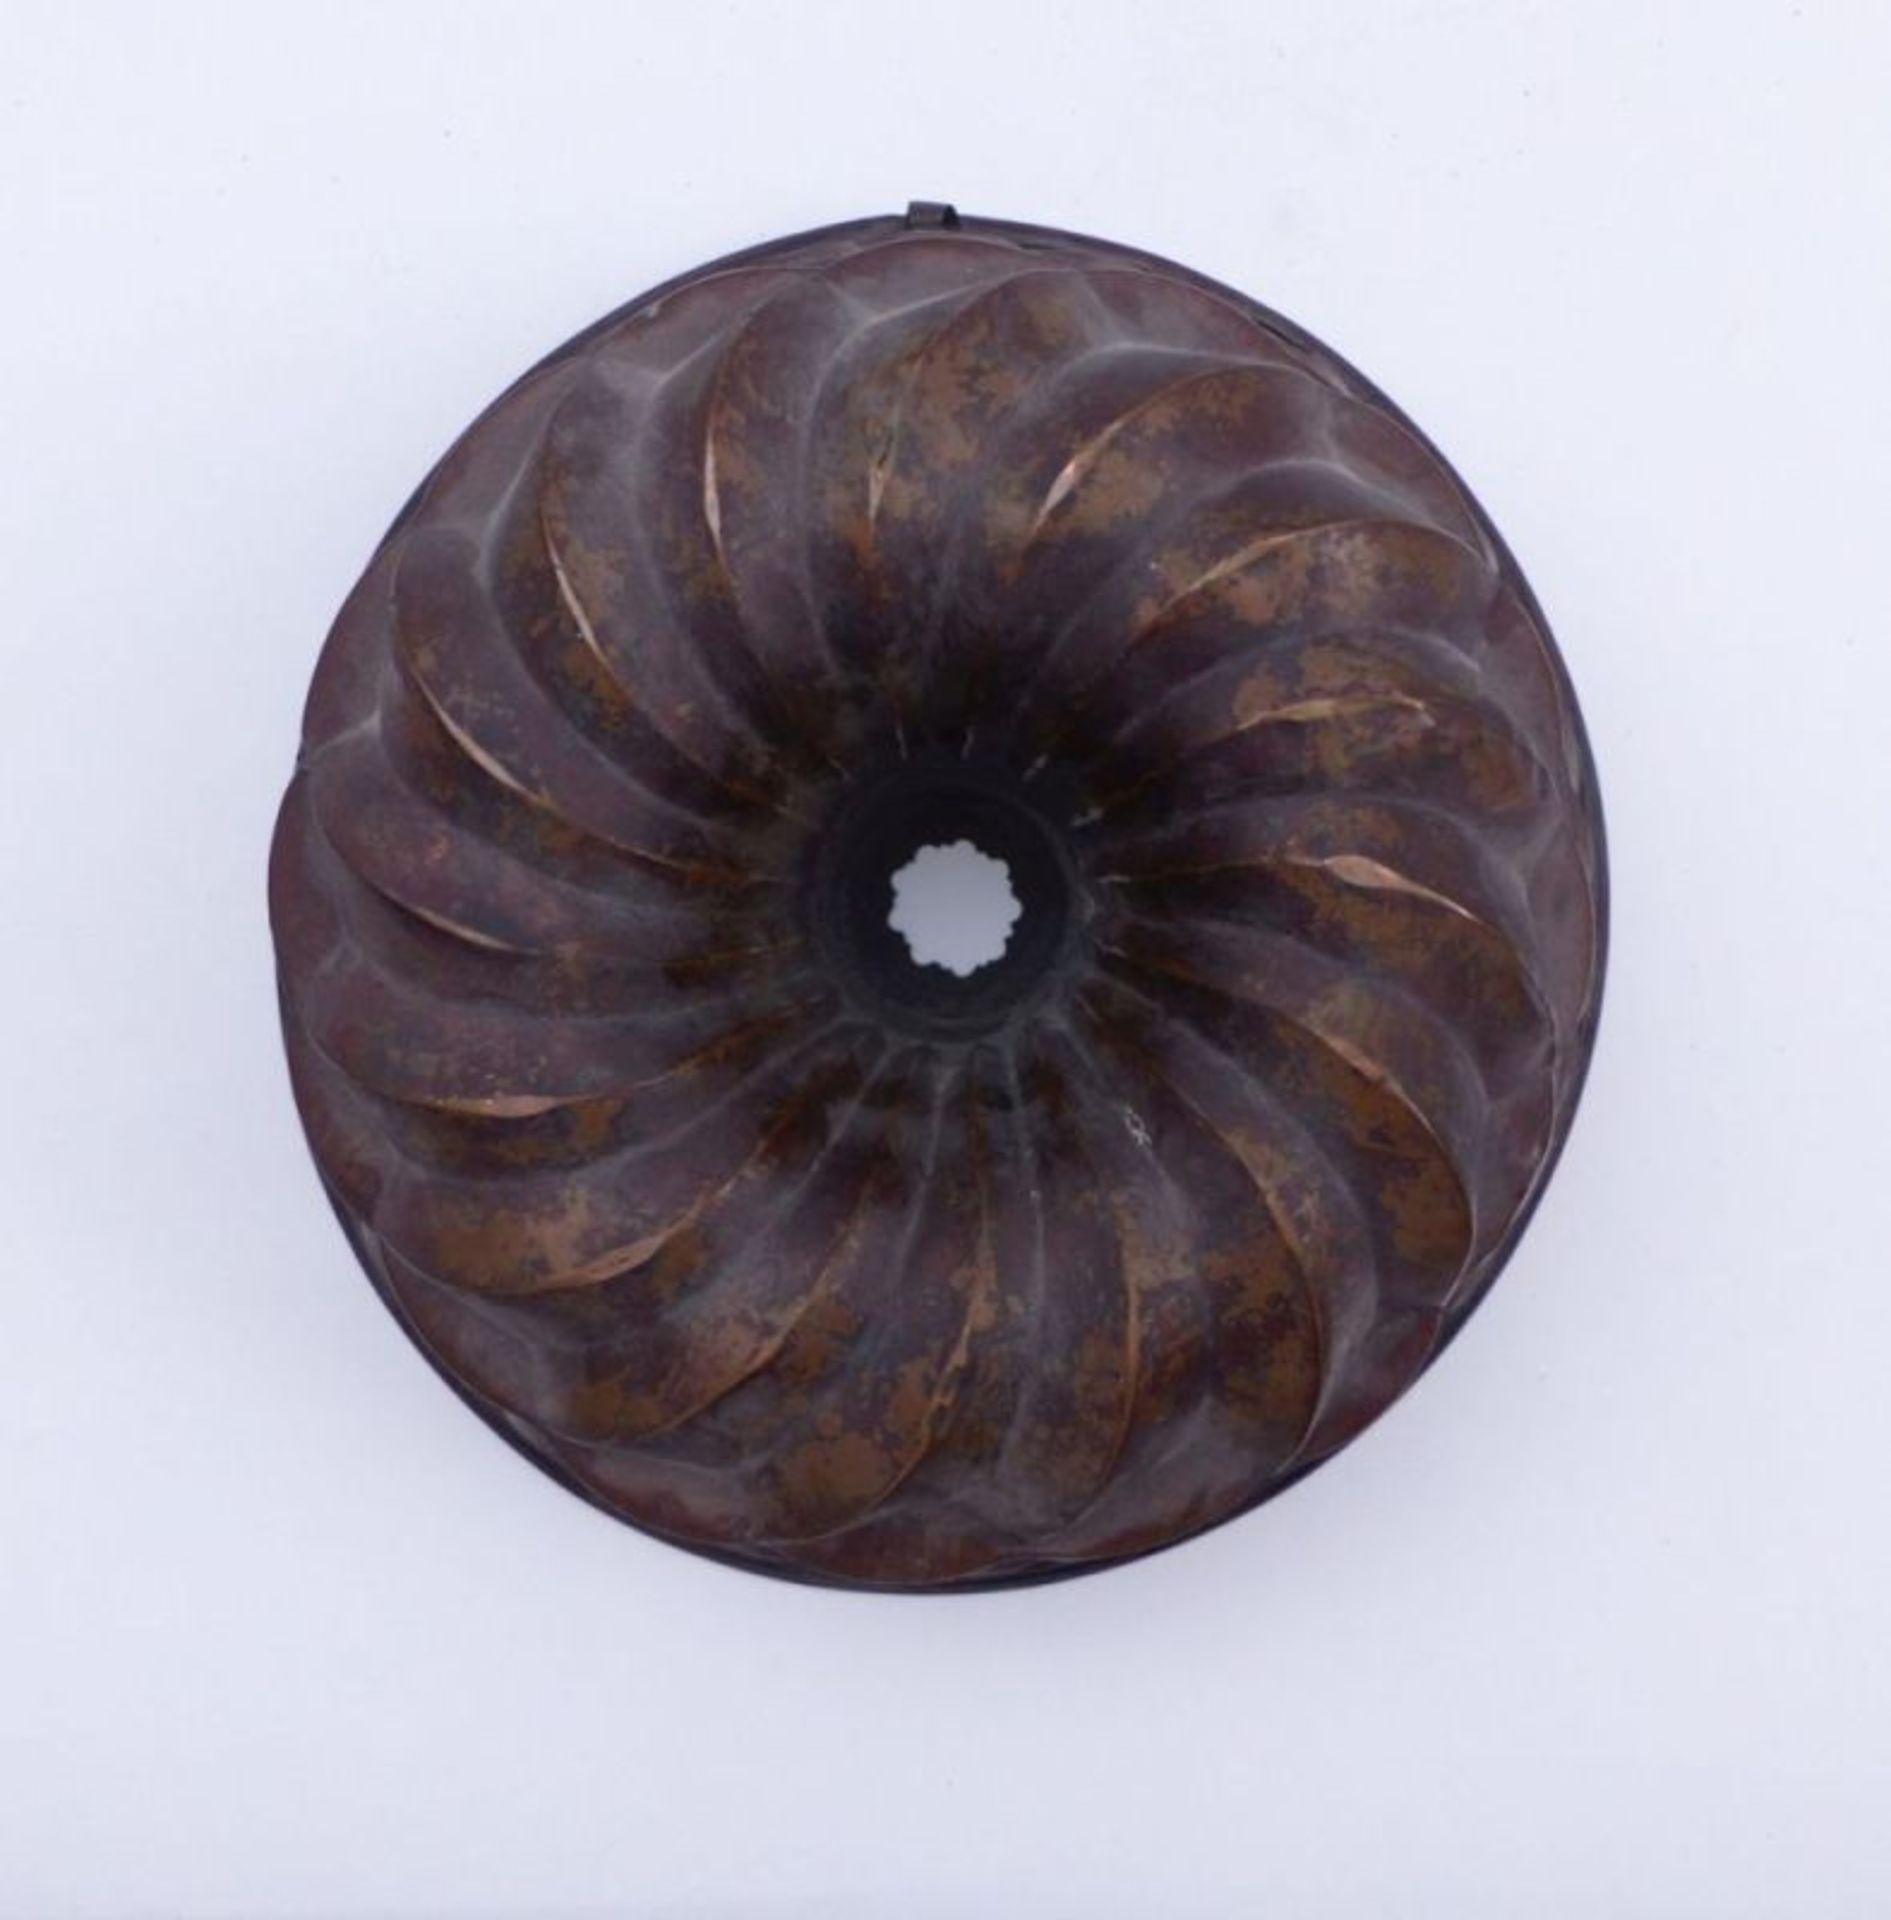 Baking mould19th centuryRound, multi-zone form with openwork inner tube, flanged rim. Copper with - Bild 2 aus 2